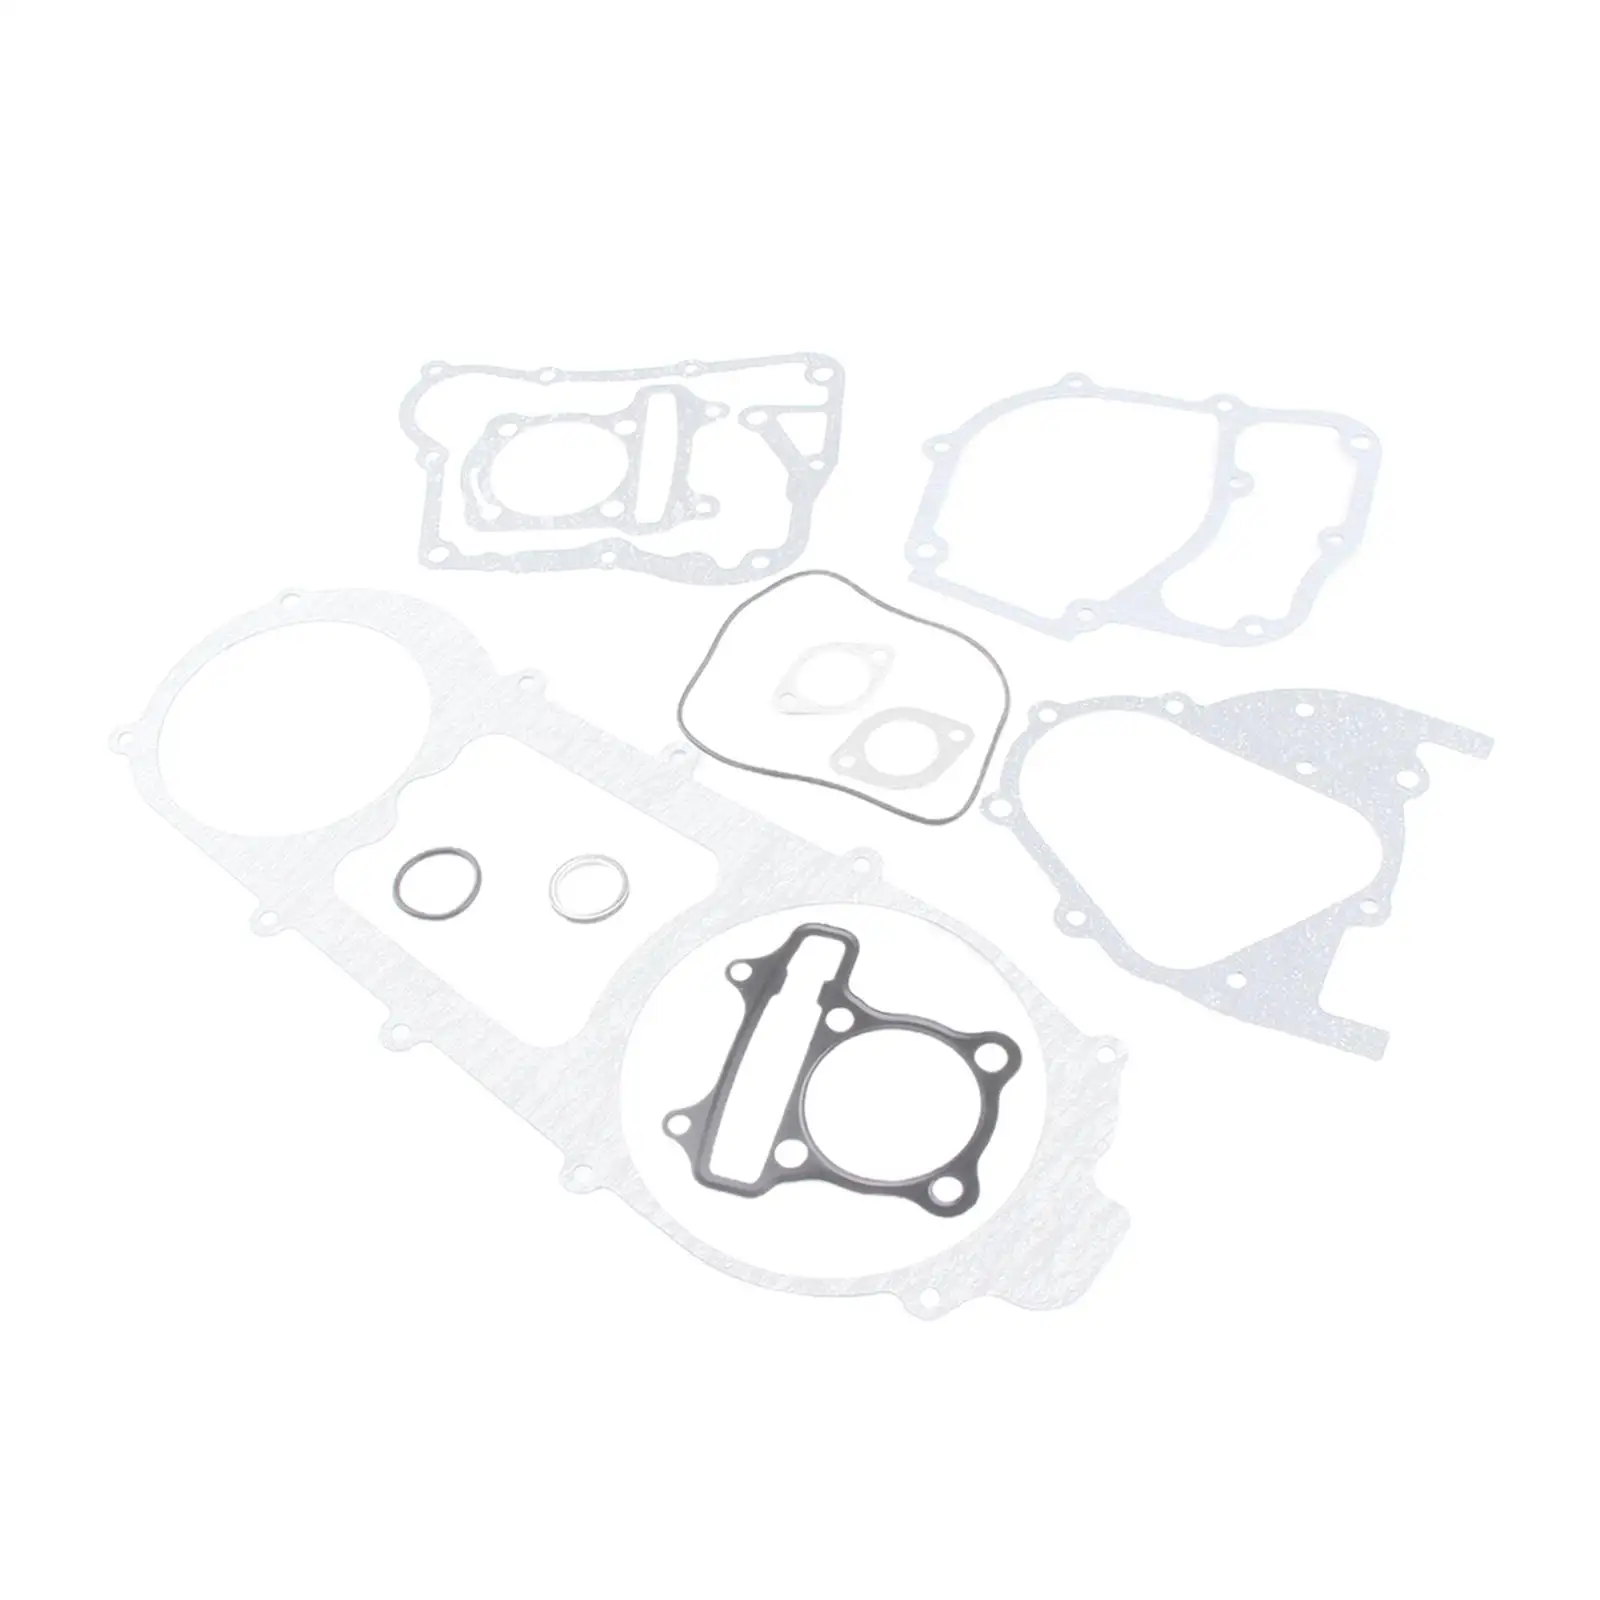 Complete Engine Head Gasket Set for GY6 150cc Moped Scooters   Go Karts